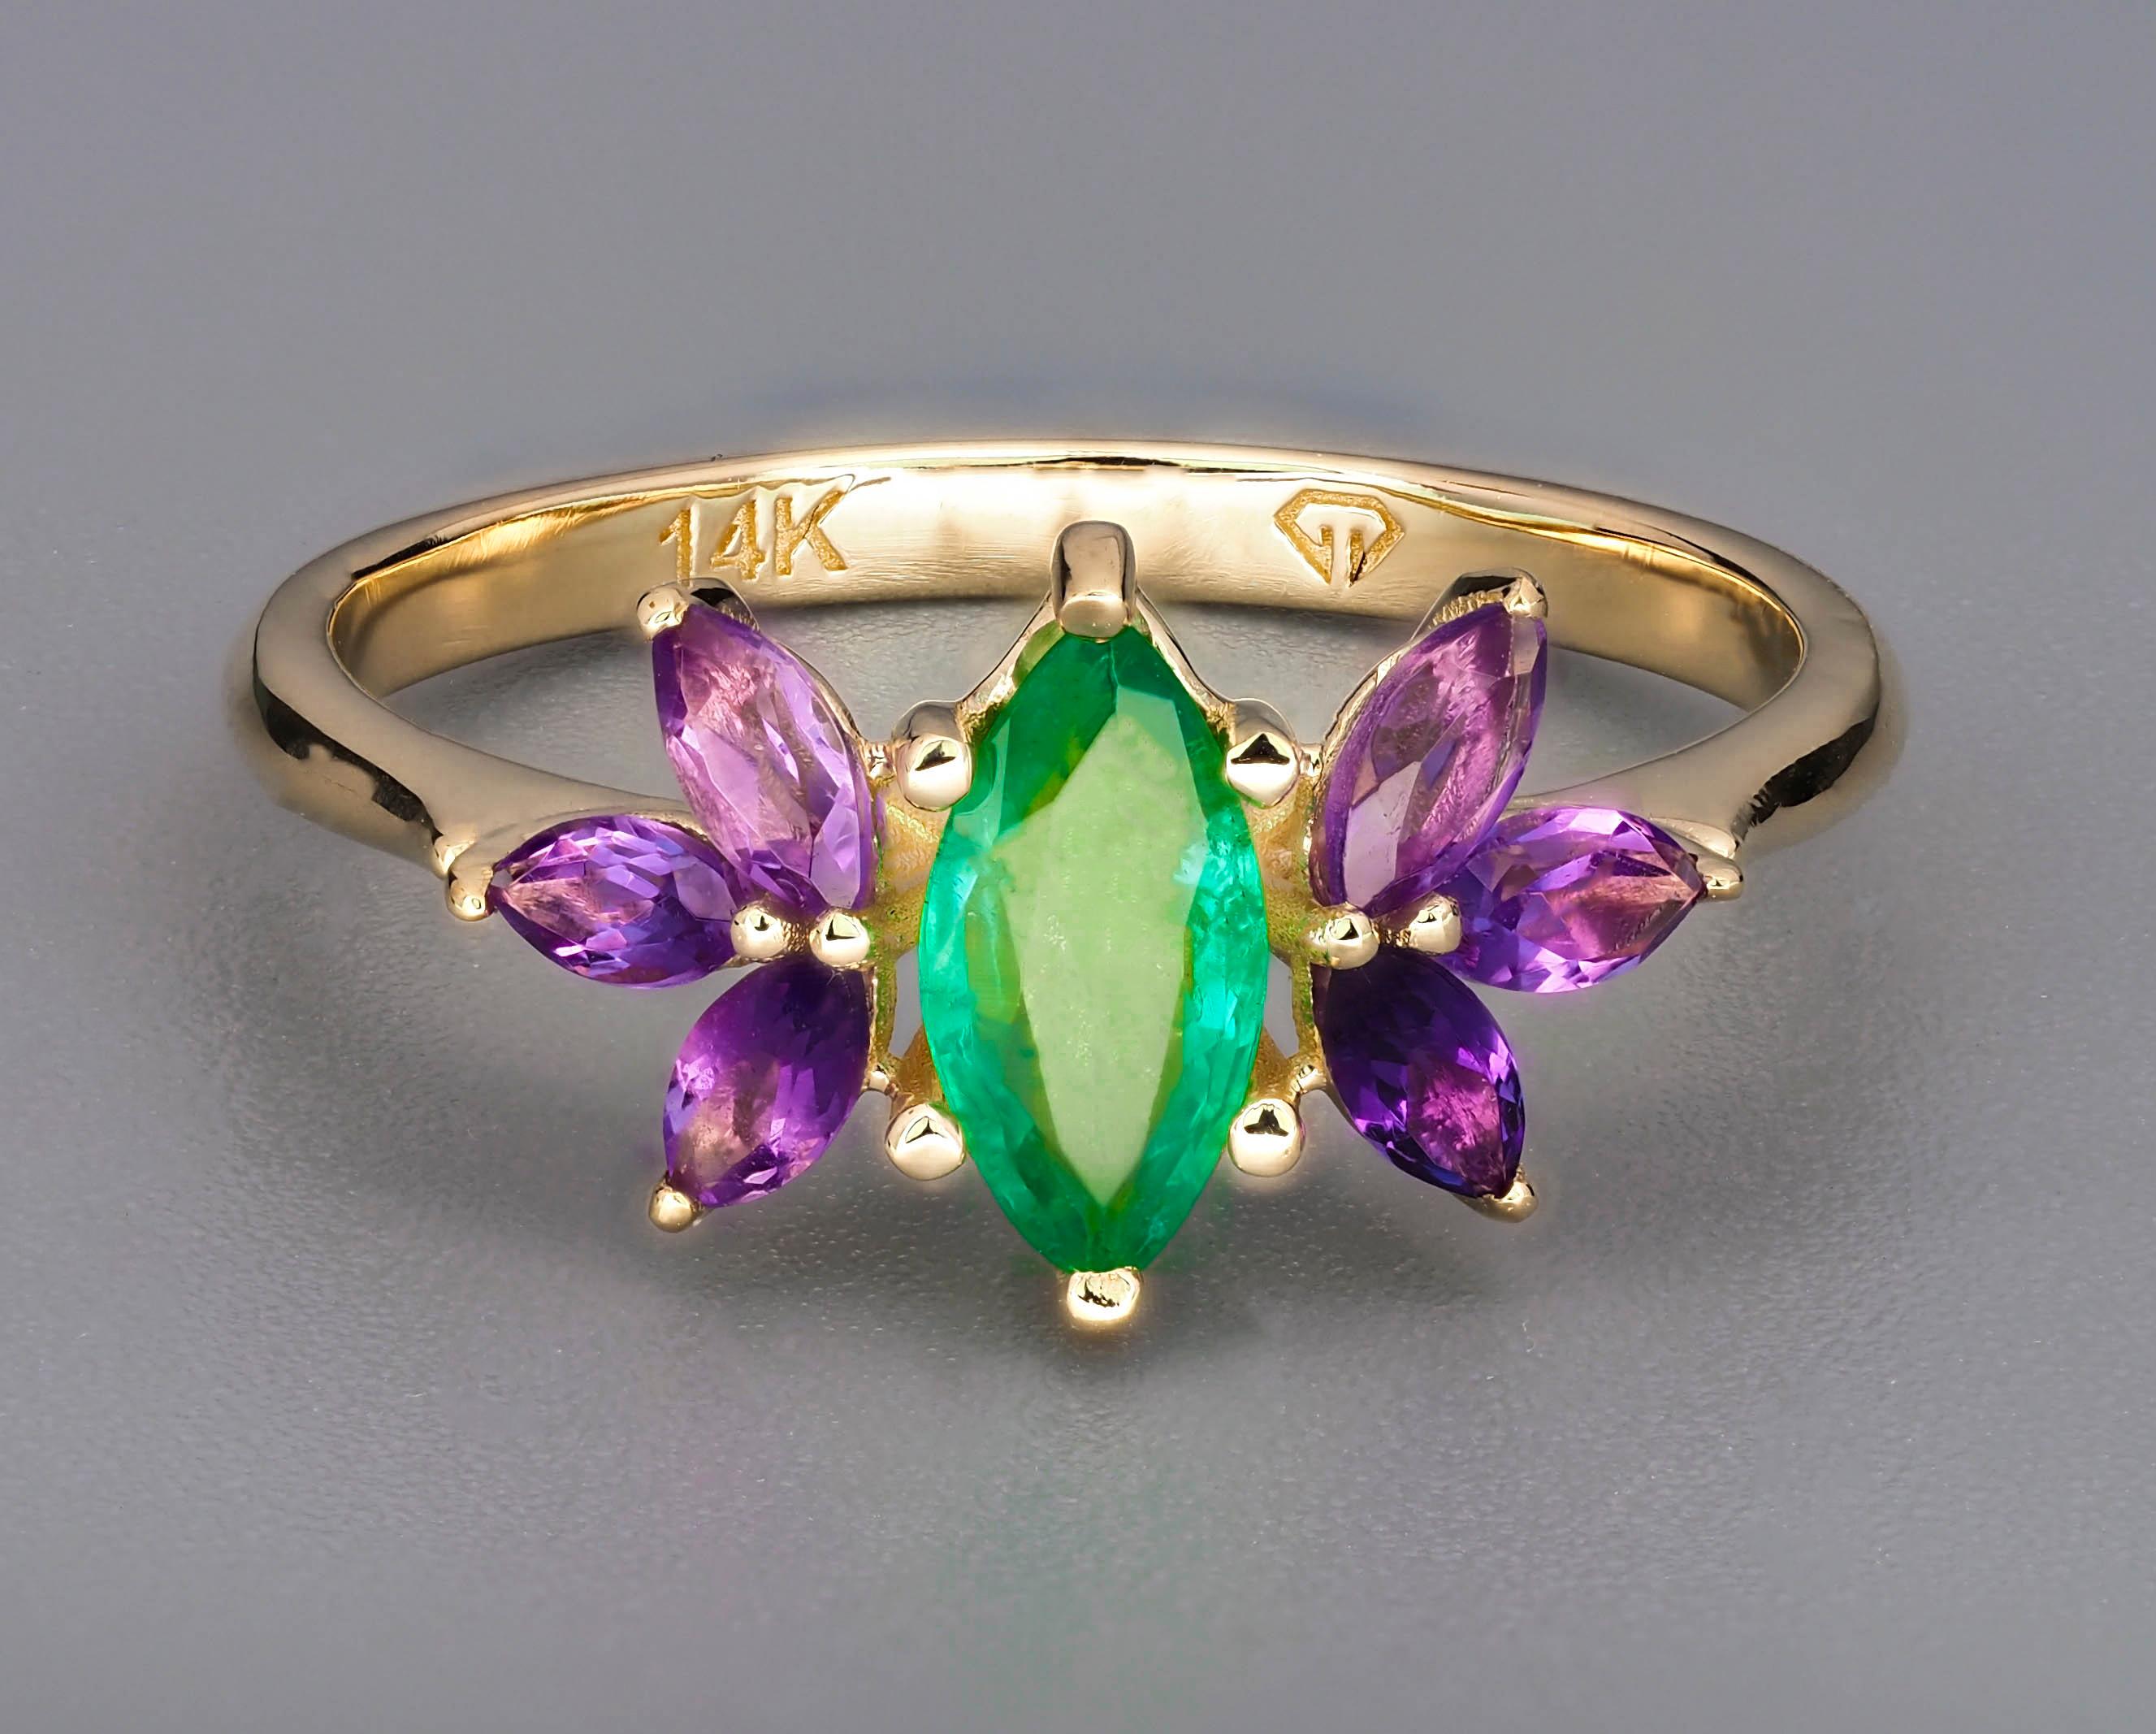 For Sale:  Emerald gold ring. 14k Gold Ring with Marquise Emerald and Amethysts.  4